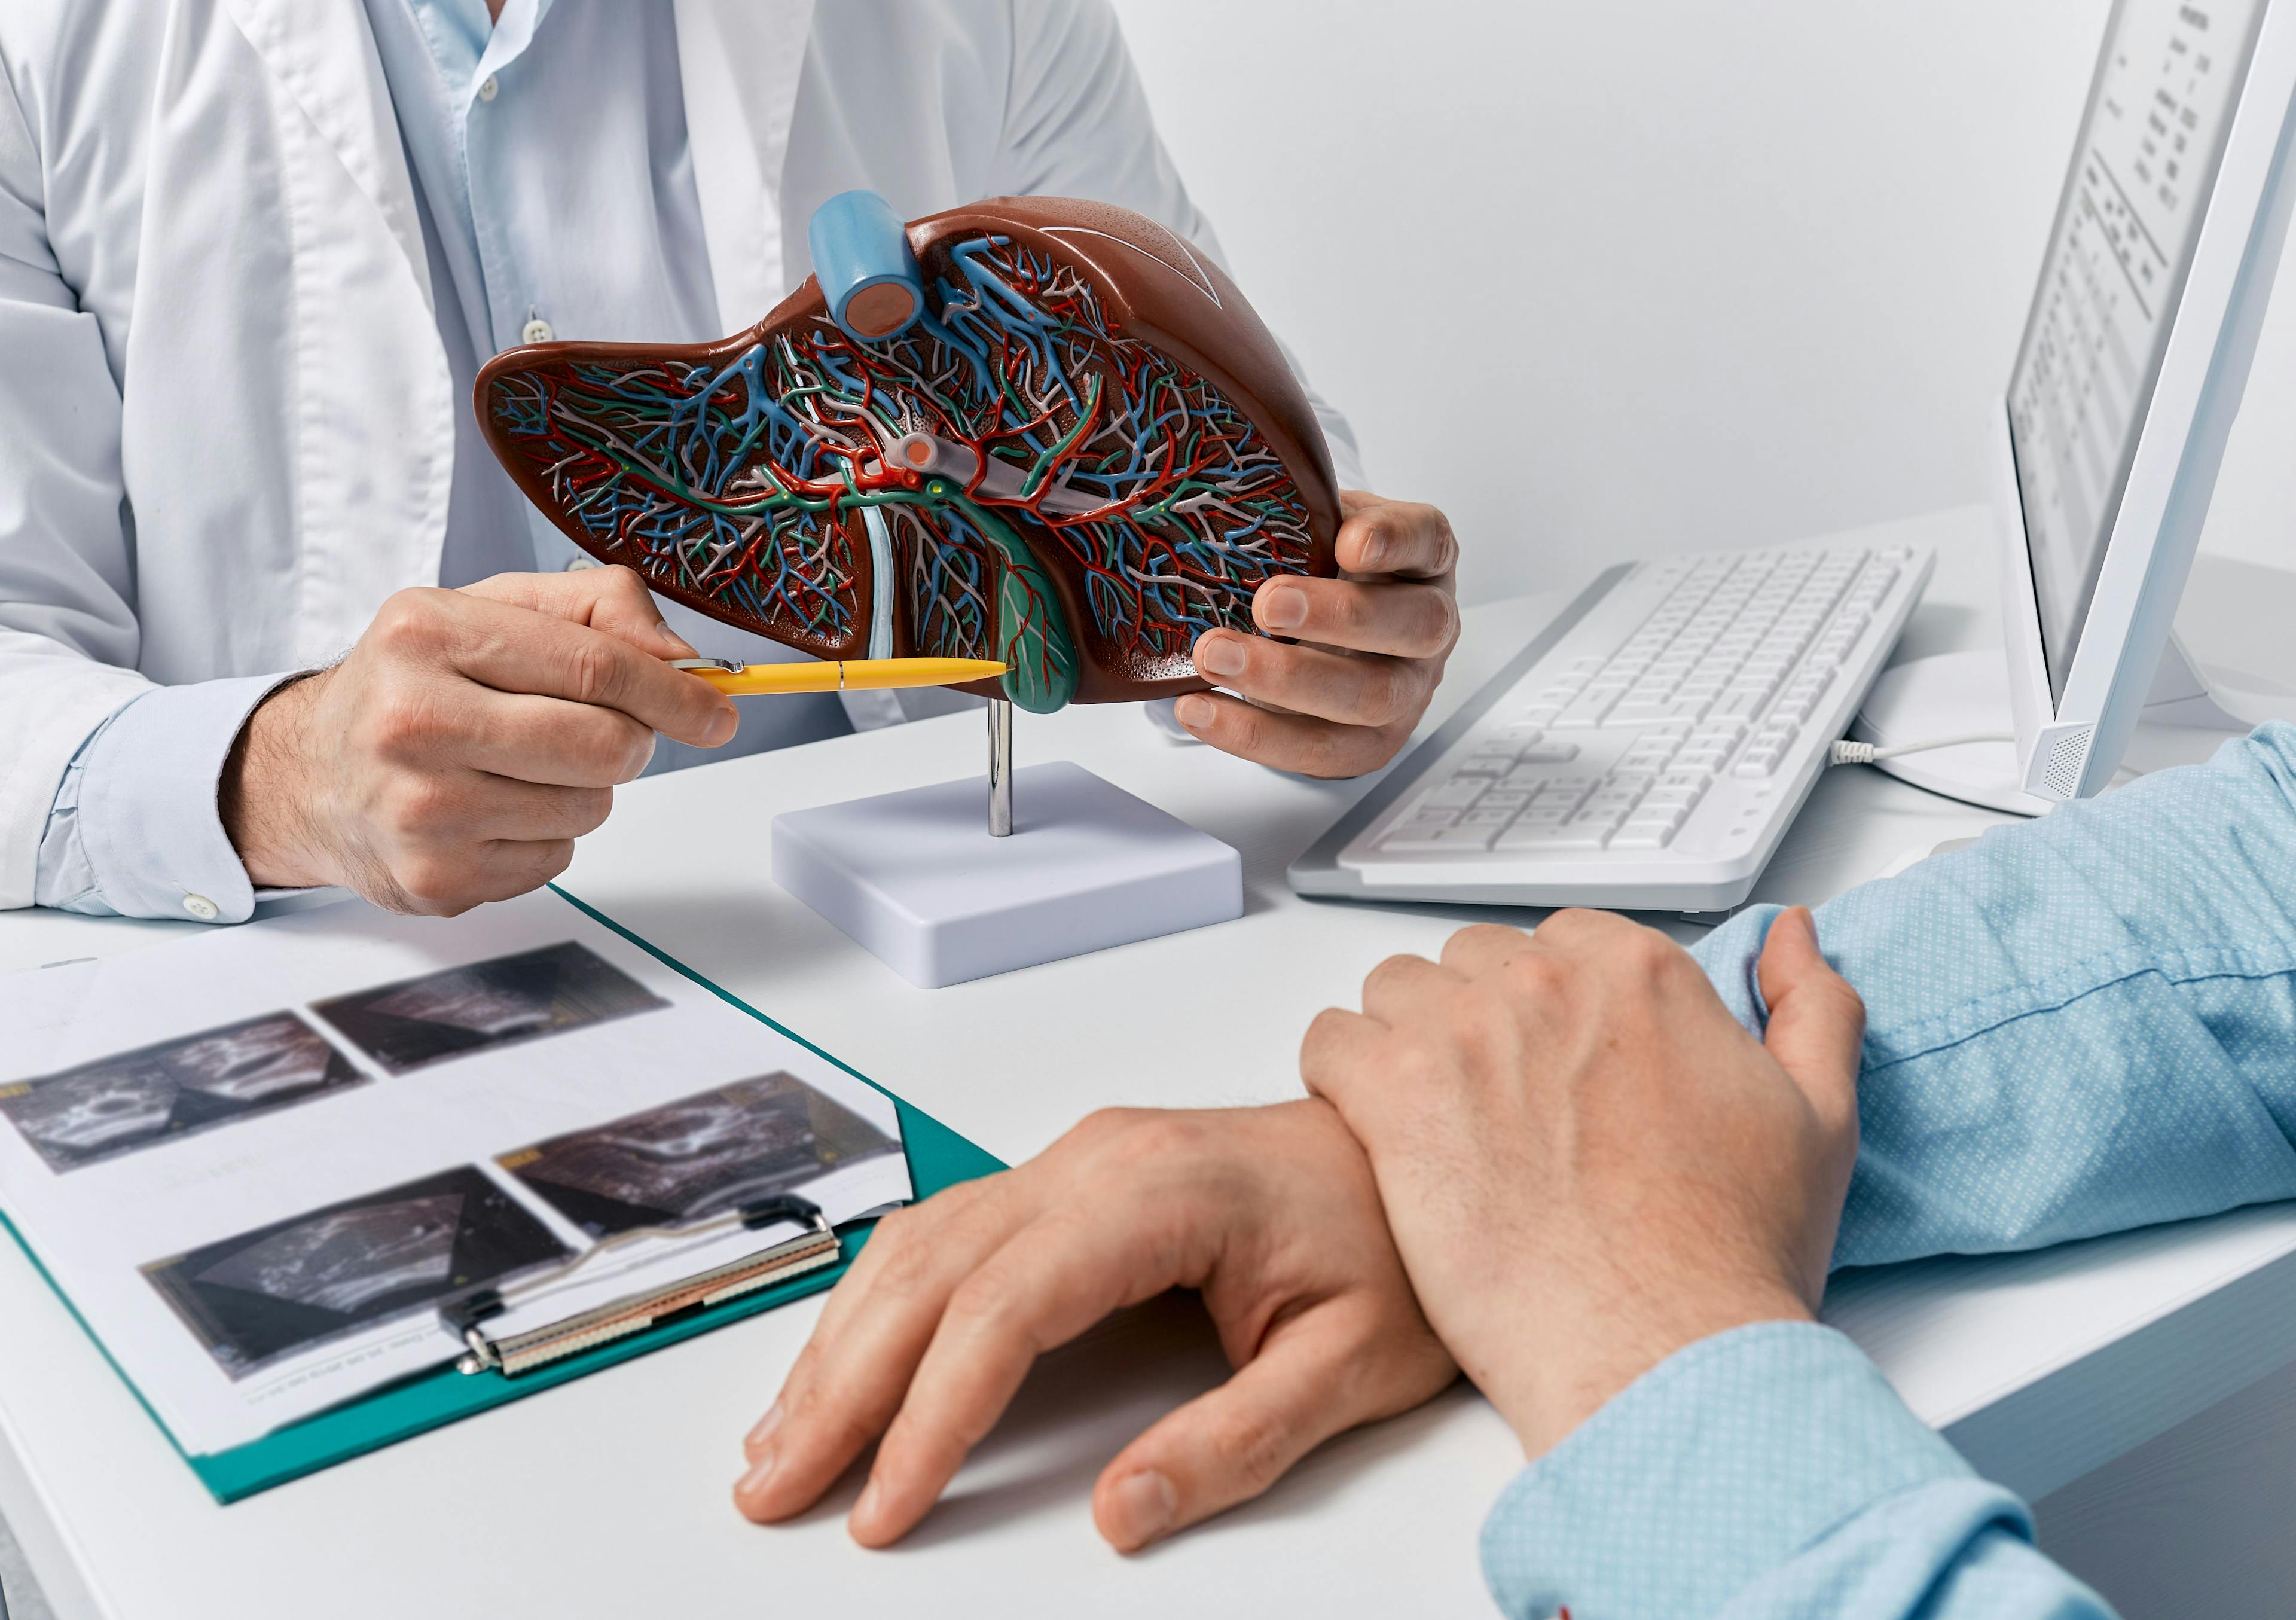 Human liver model on doctor's table, close-up. Treatment of hepatitis, cirrhosis and liver cancer | Image Credit: © Peakstock - stock.adobe.com